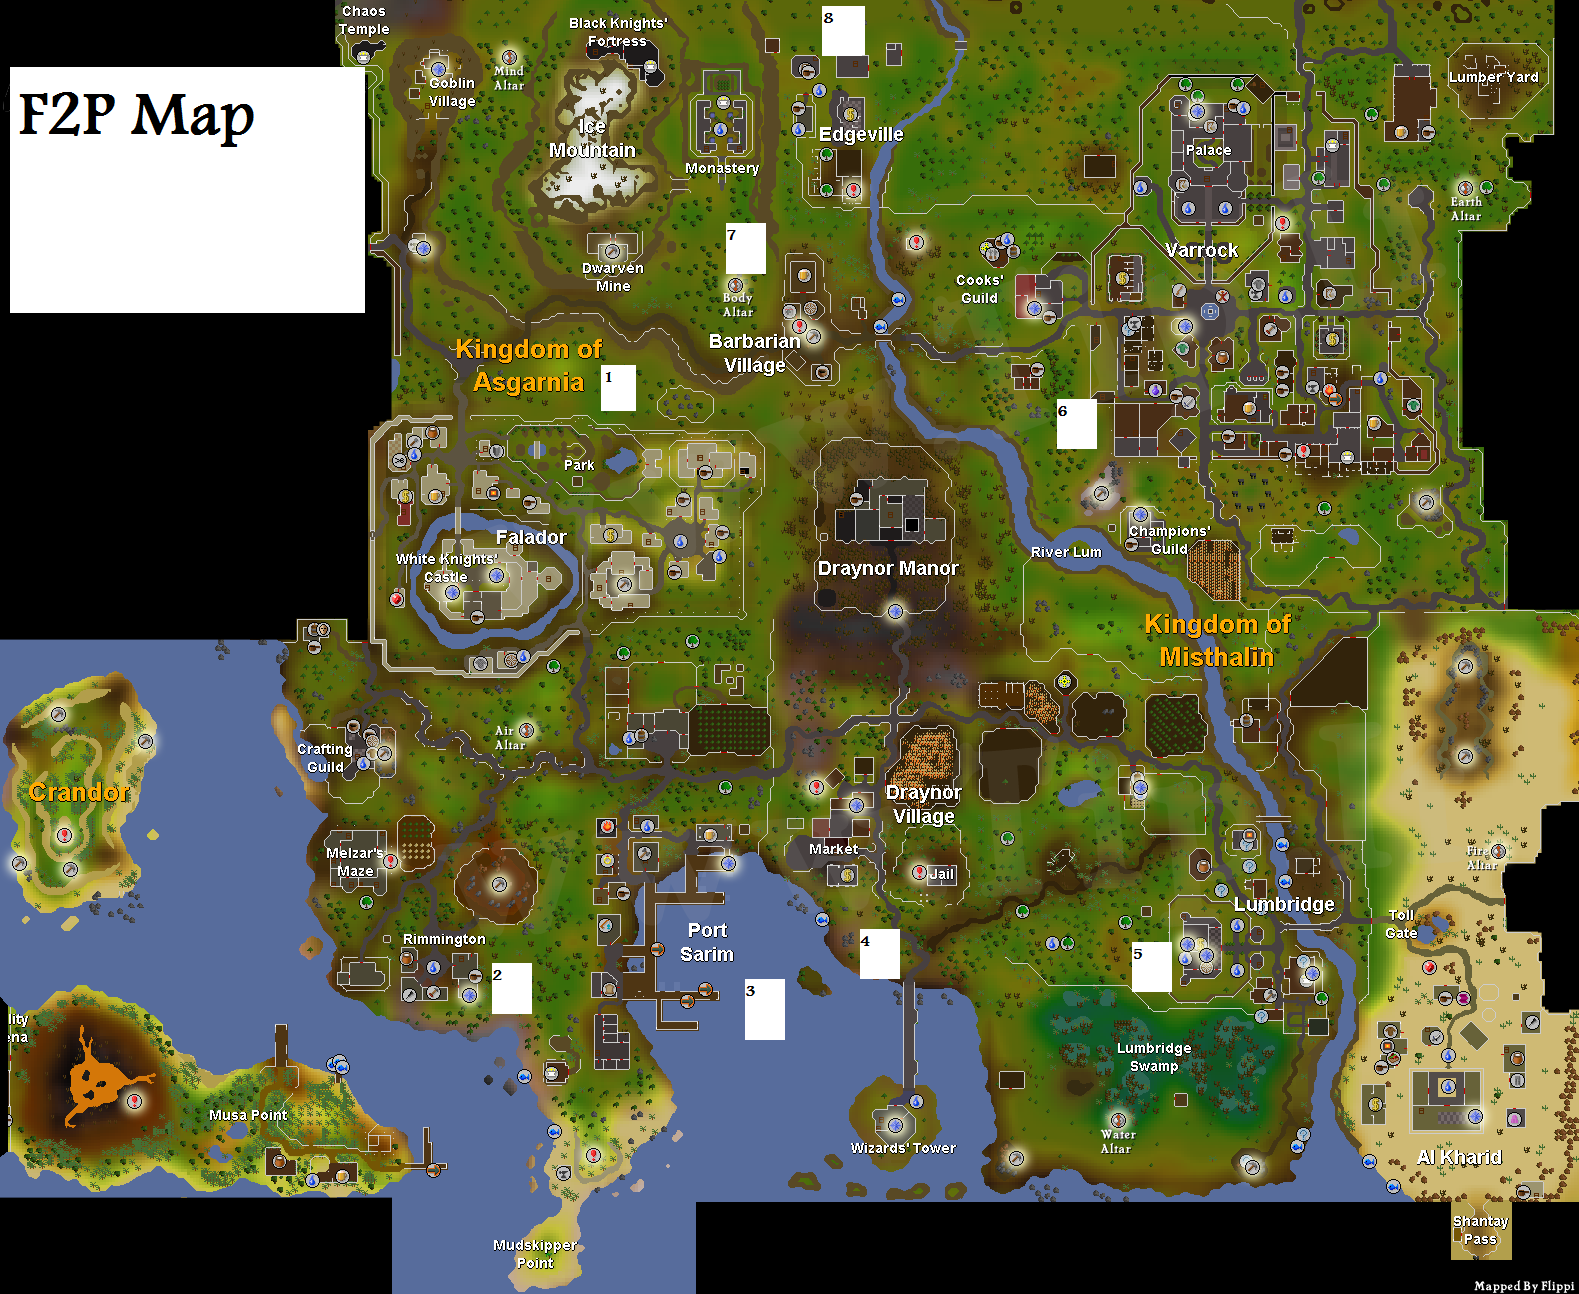 Here are some useful maps that say some info that is quite useful! 